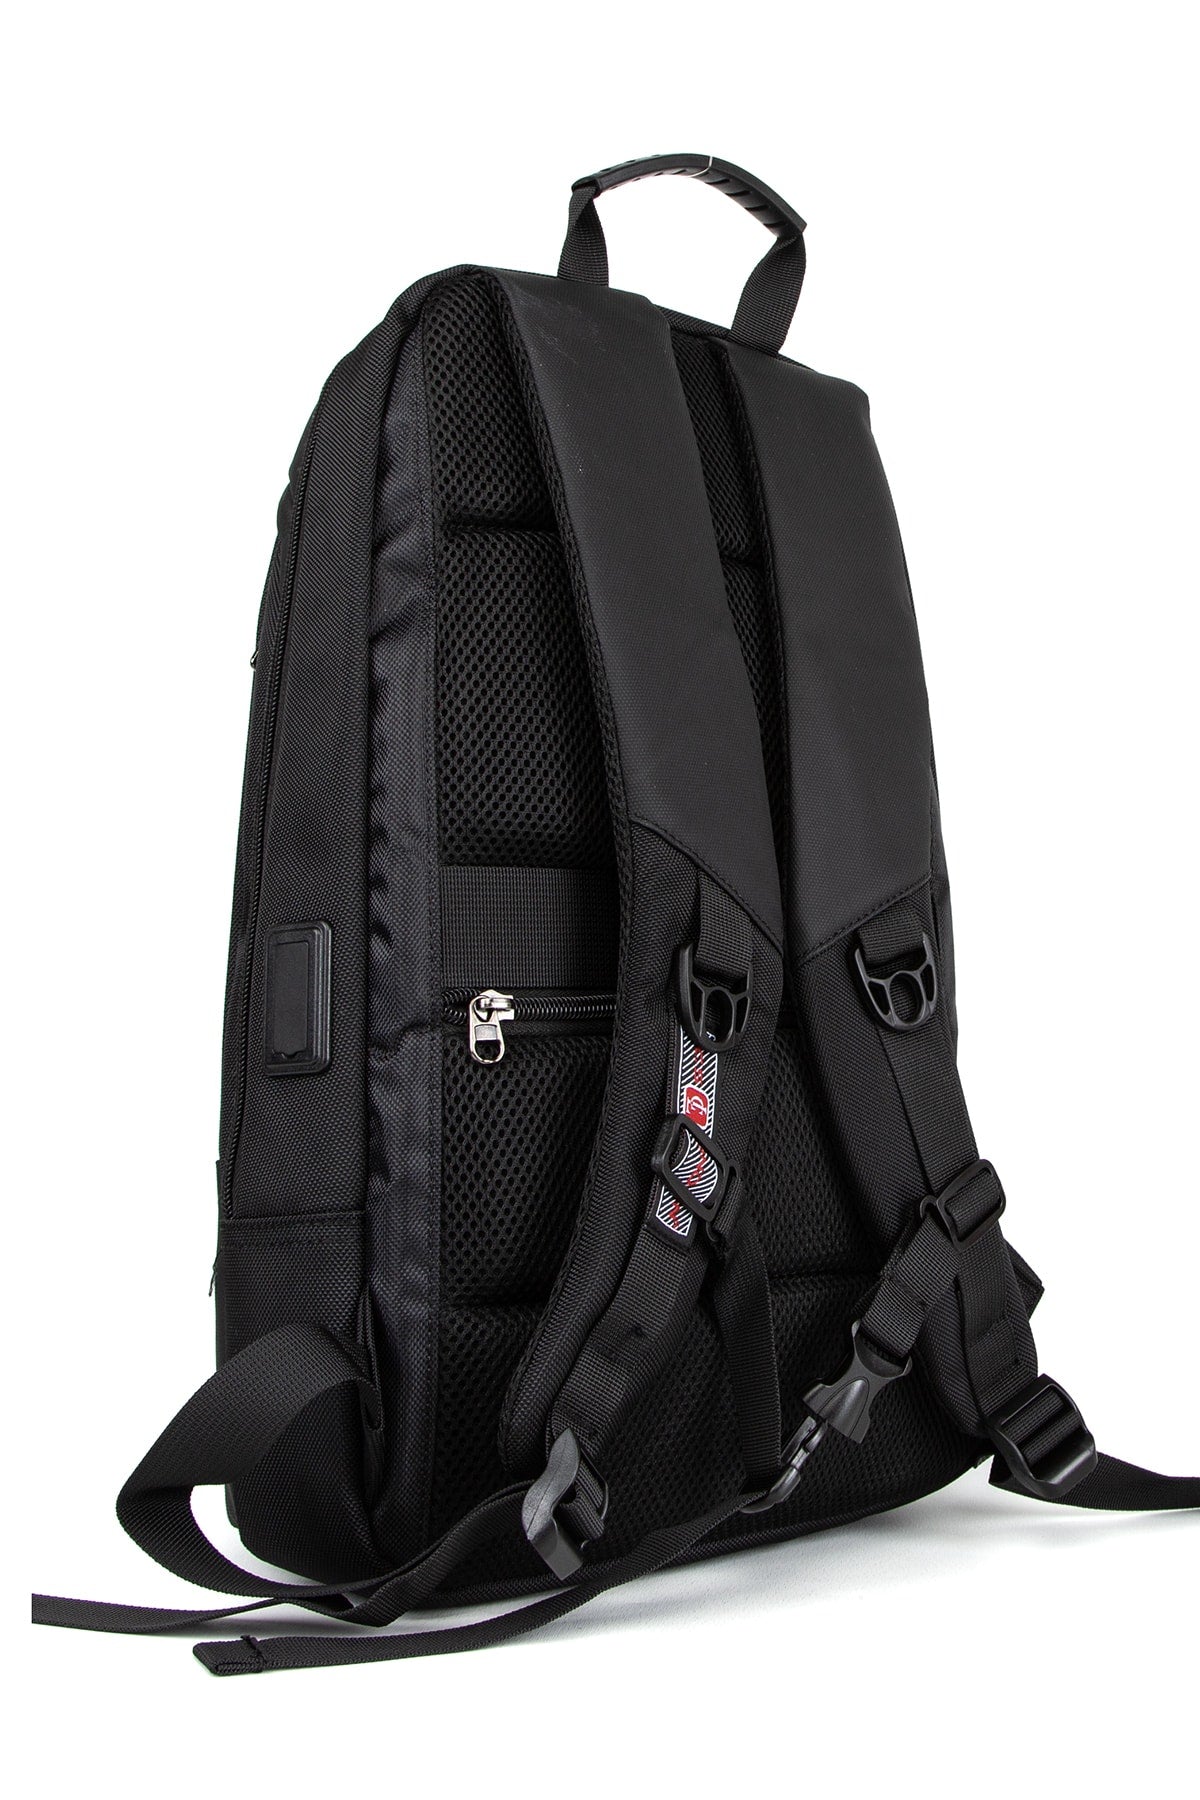 Protect Your Laptop With Waterproof Lined Backpack: 15.6 Inch Laptop Compartment, USB Wired